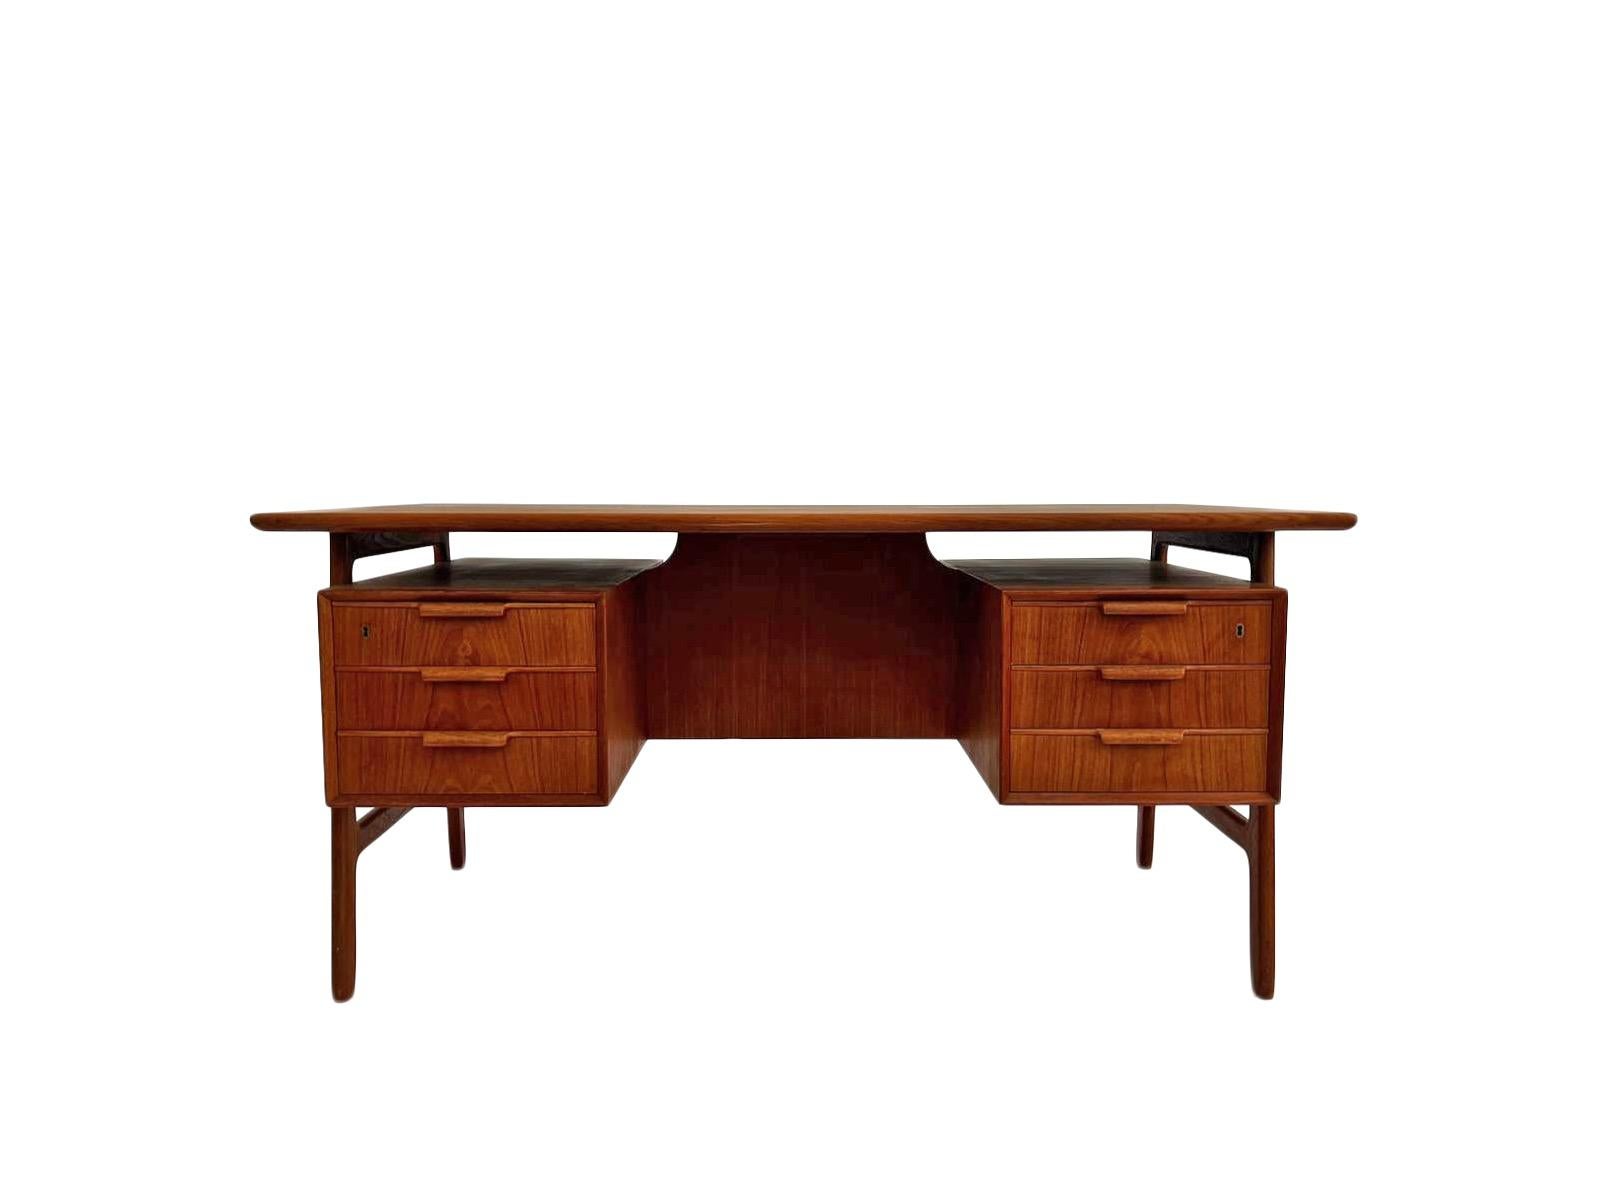 A beautiful Danish Model 75 teak writing desk designed by Gunni Omann for Omann Jun Møblefabrik, this would make a stylish addition to any work area. A striking piece of classically designed Scandinavian furniture.

The desk has two banks of three